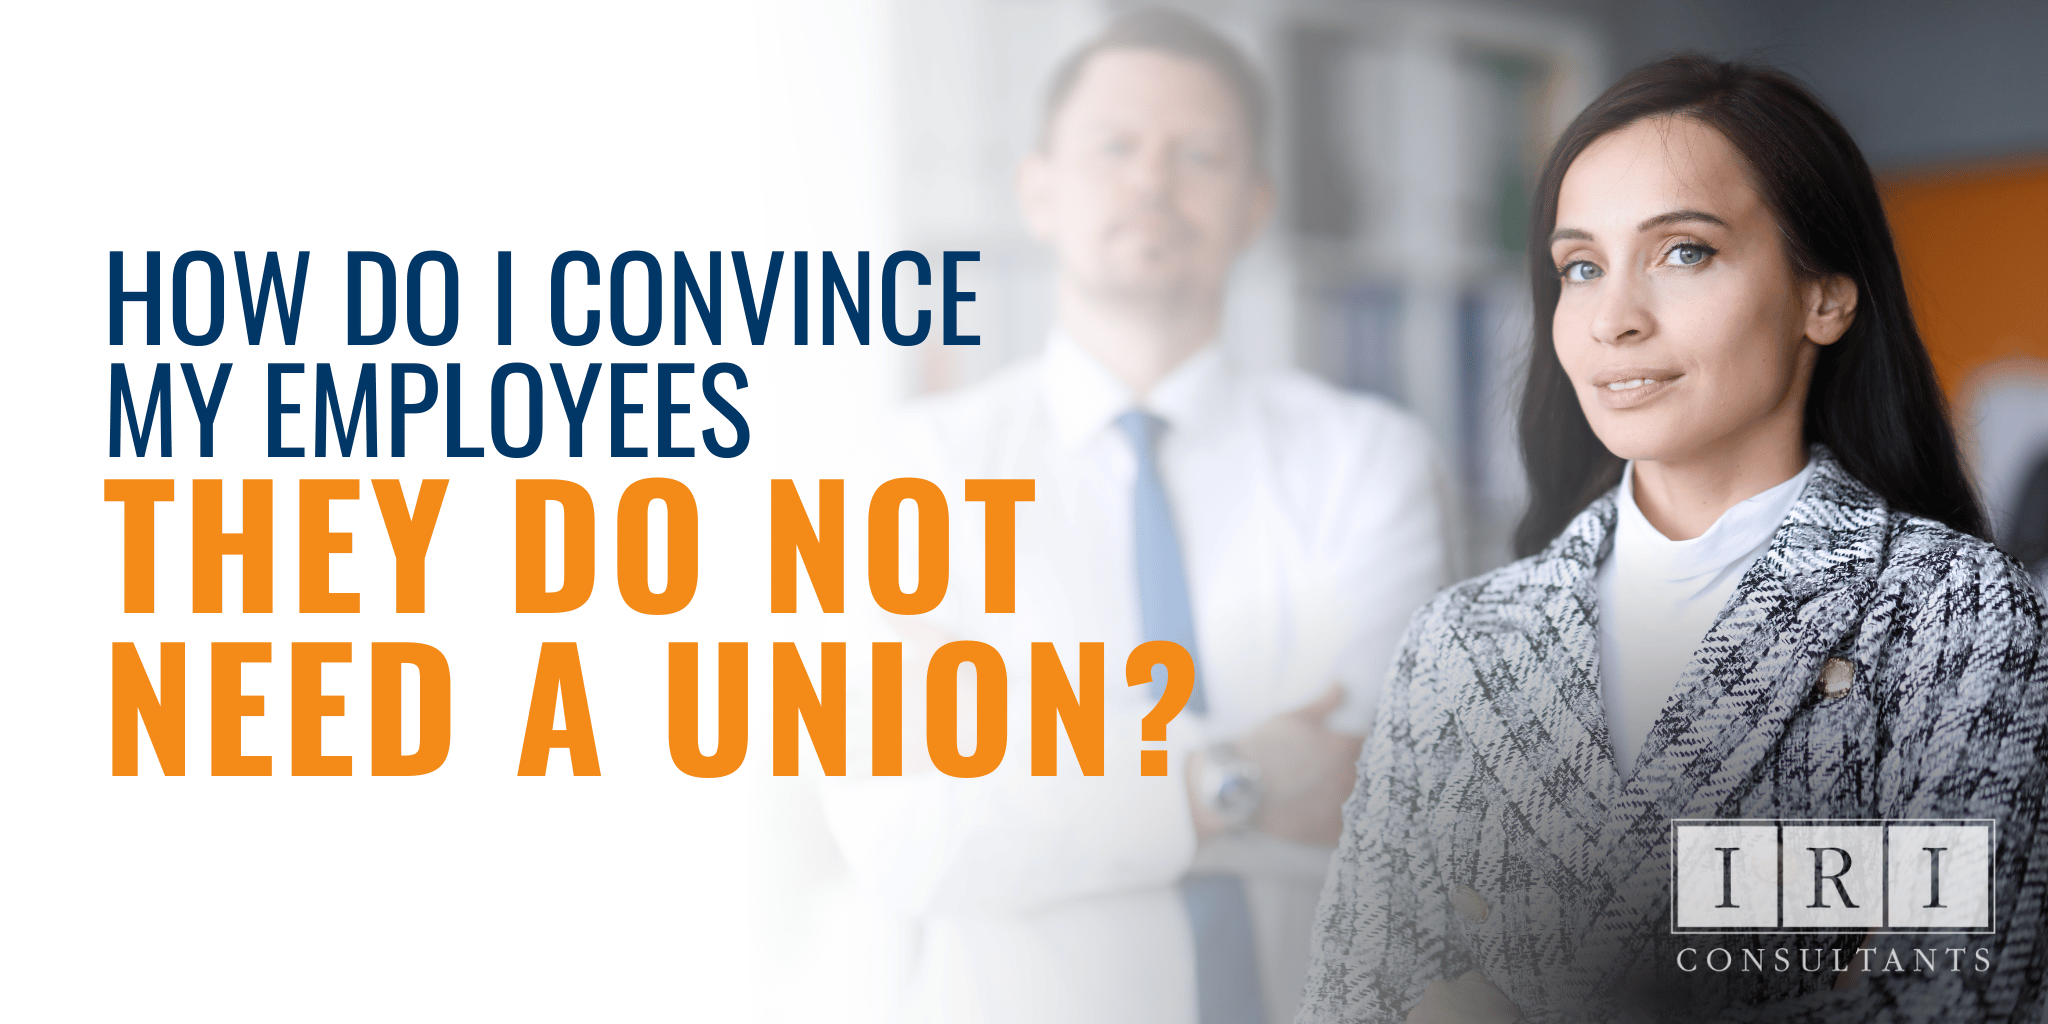 How Do I Convince My Employees They Do Not Need A Union